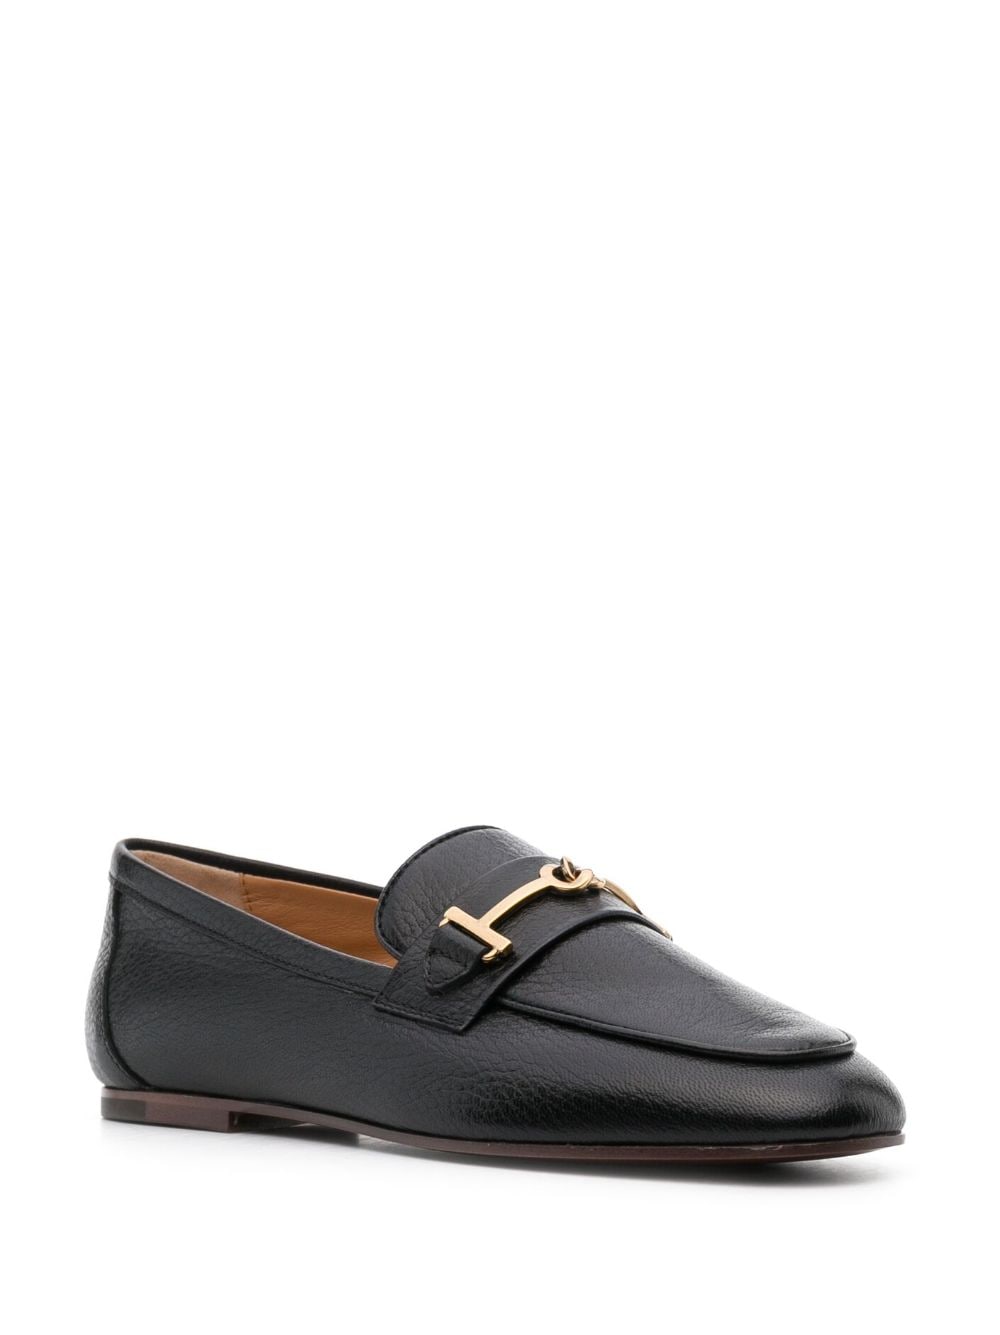 TOD'S T-RING LEATHER LOAFERS